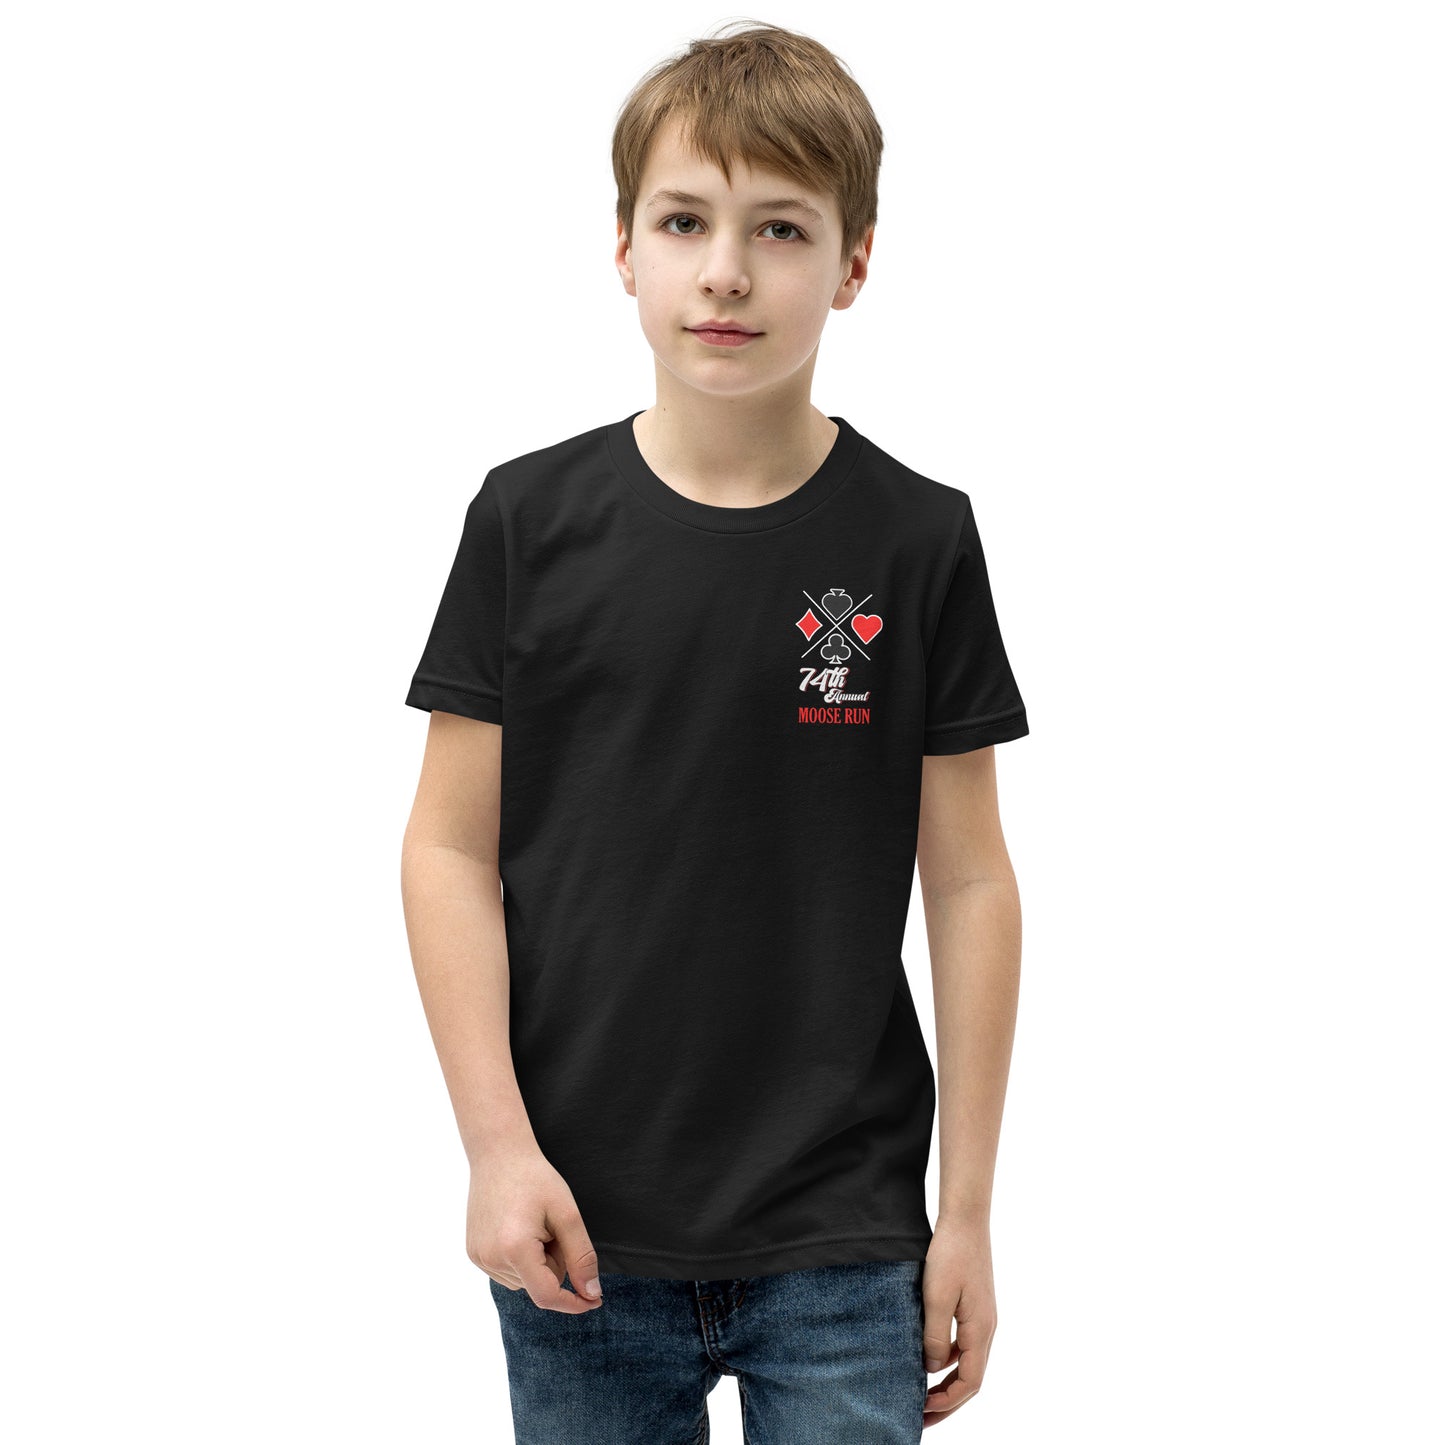 Youth Official Four Aces 74th Moose Run Event Shirt